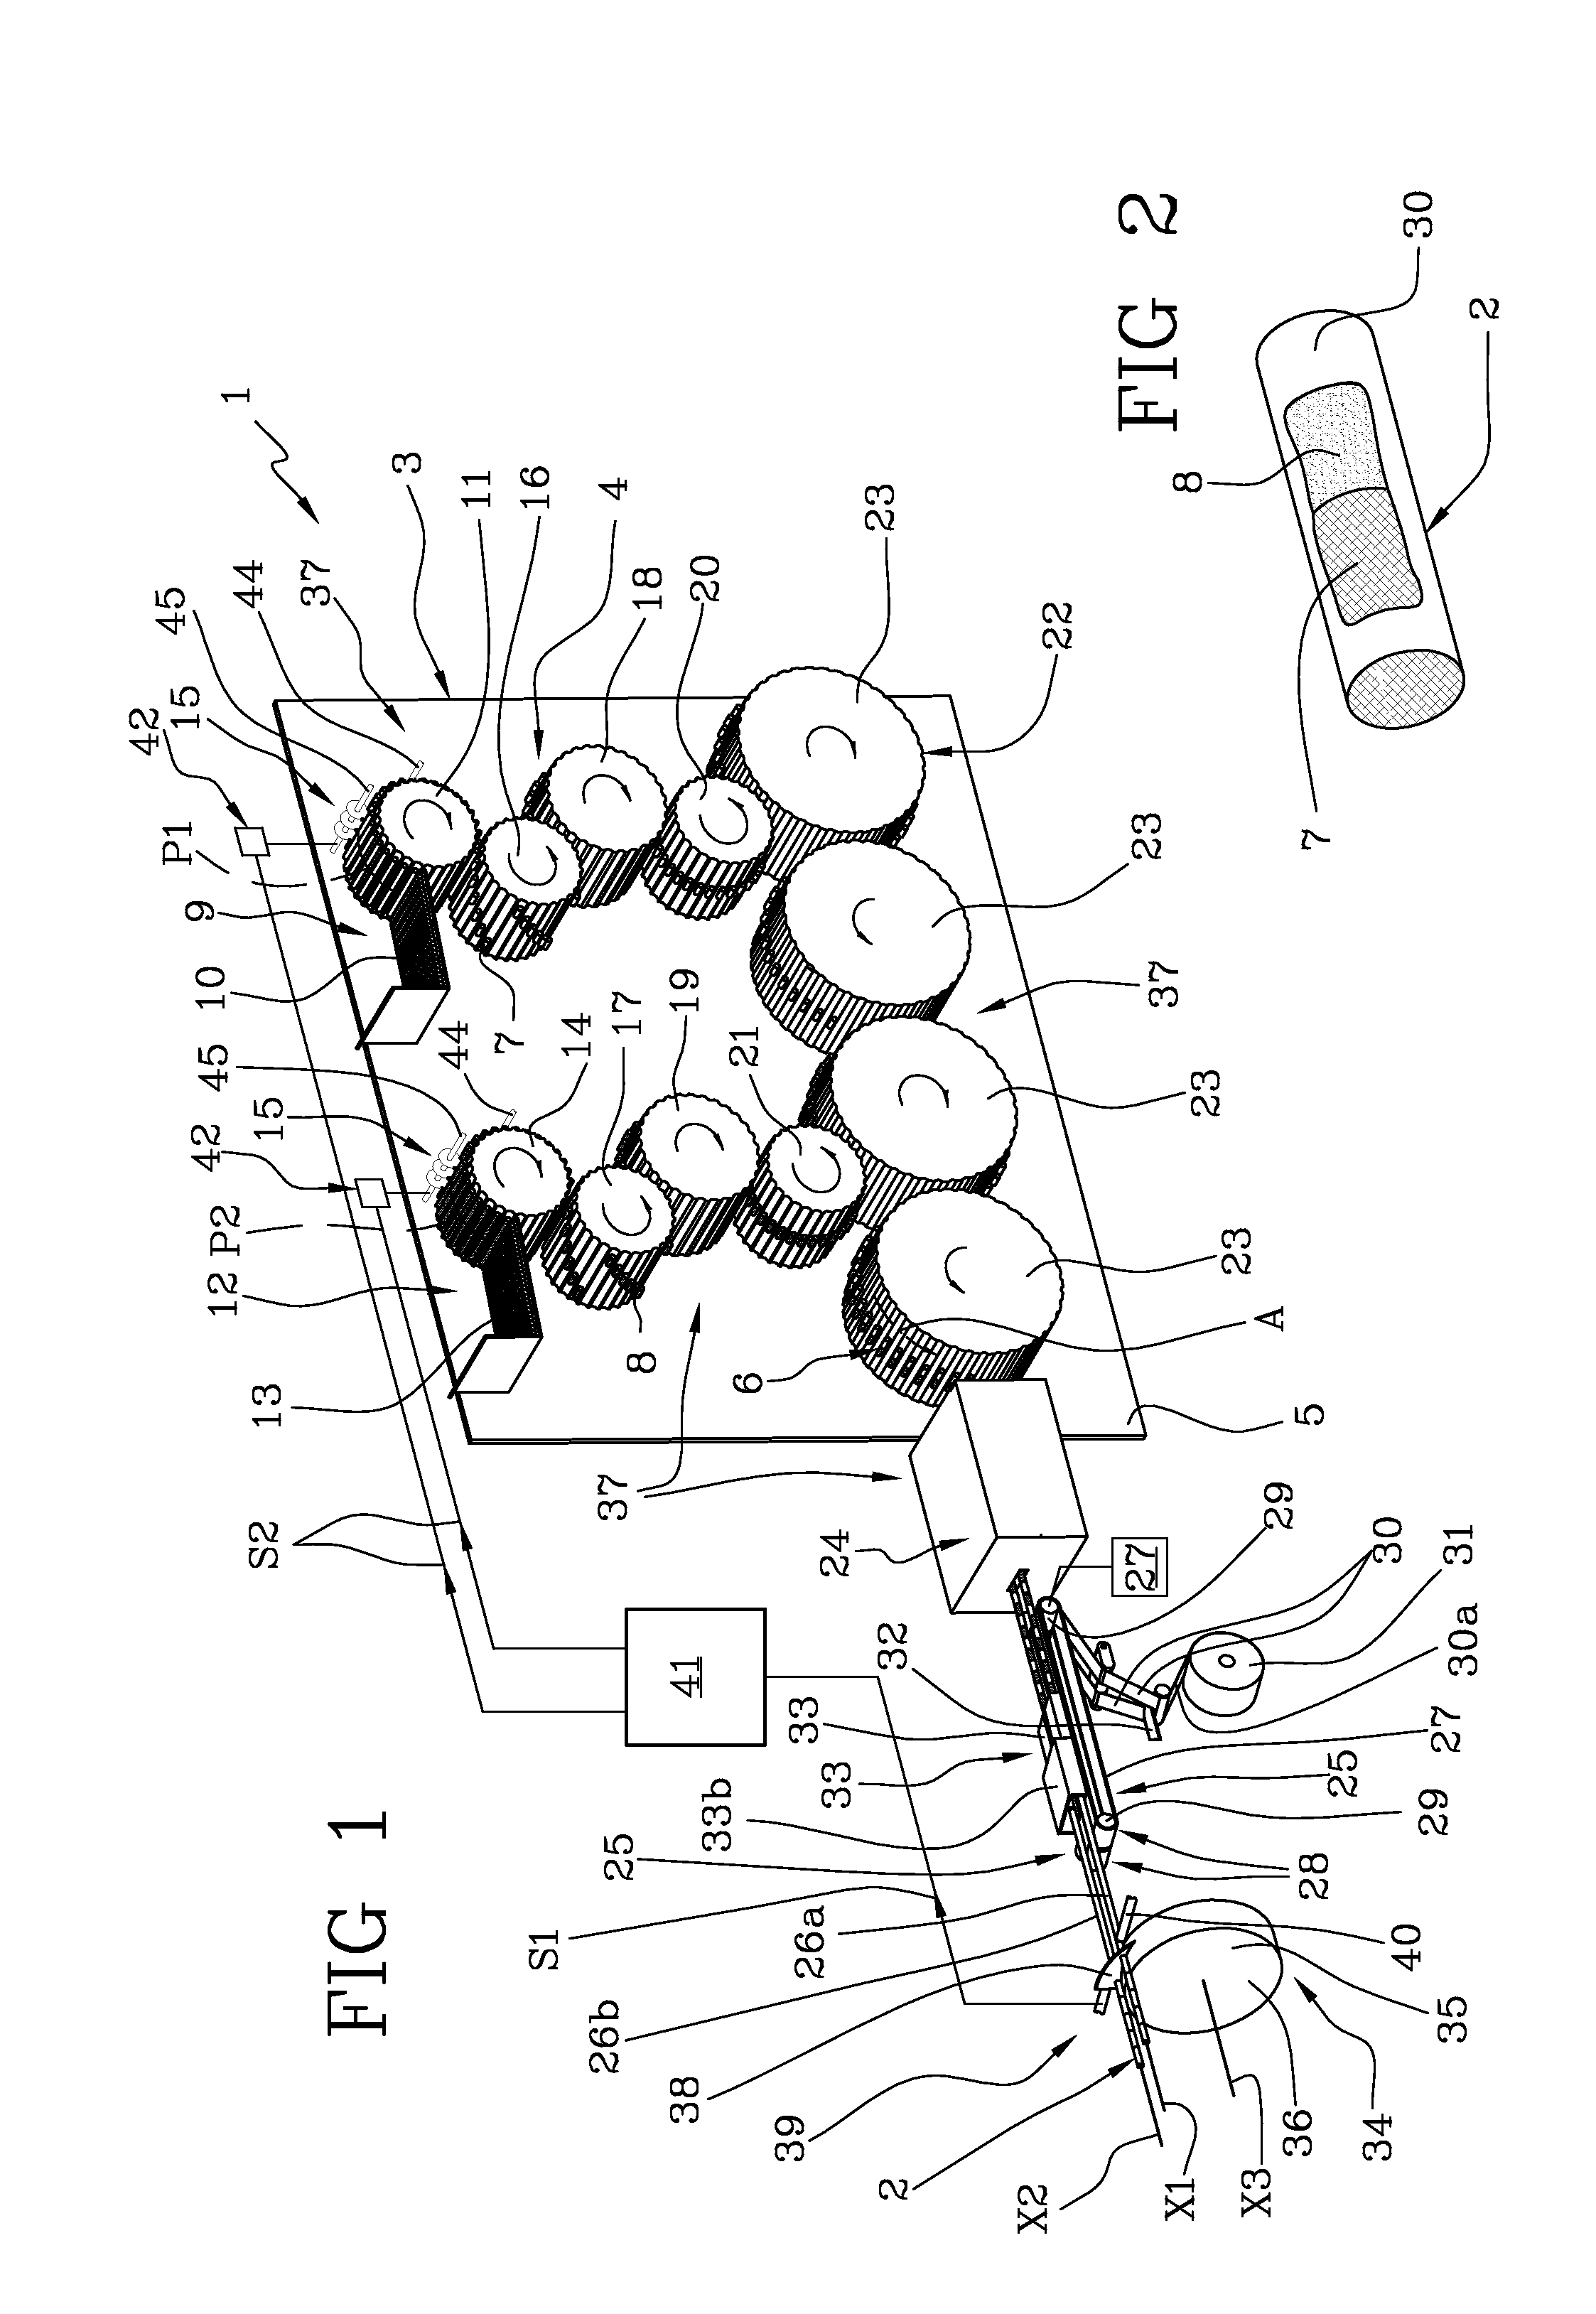 Twin track machine and a method for manufacturing composite filters attachable to cigarettes, cigars and the like